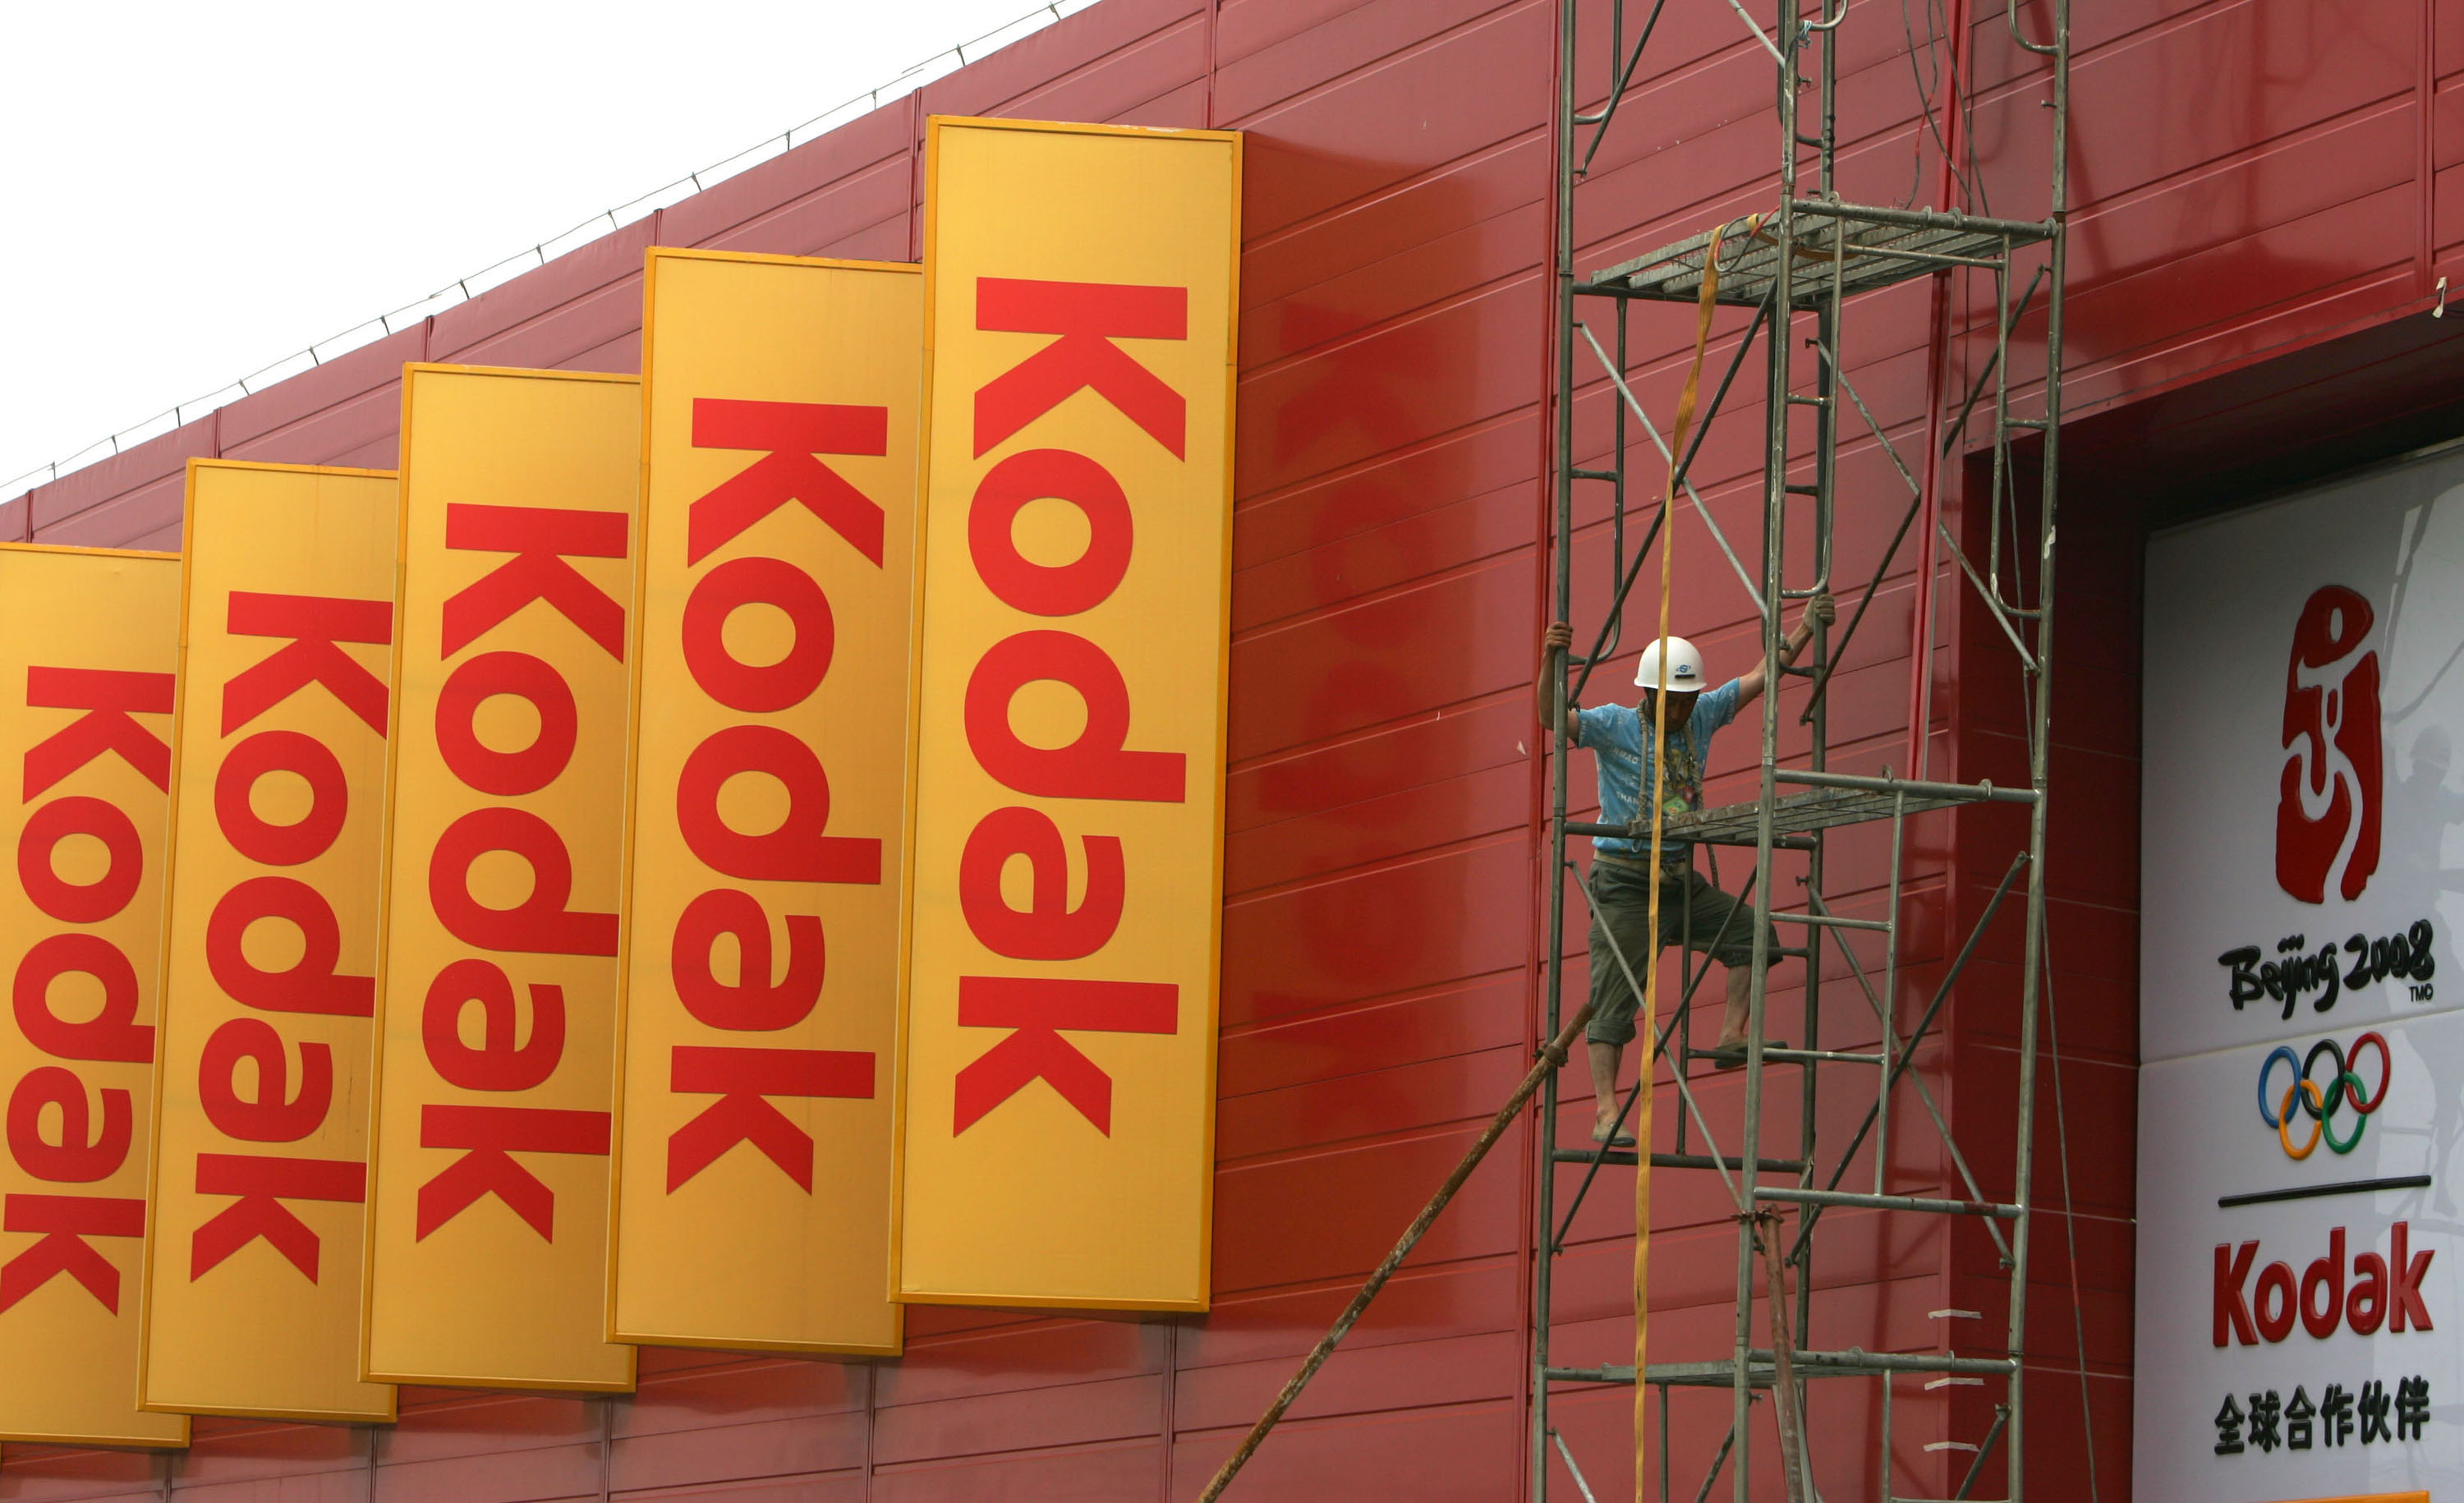 The Kodak logo on signs in China